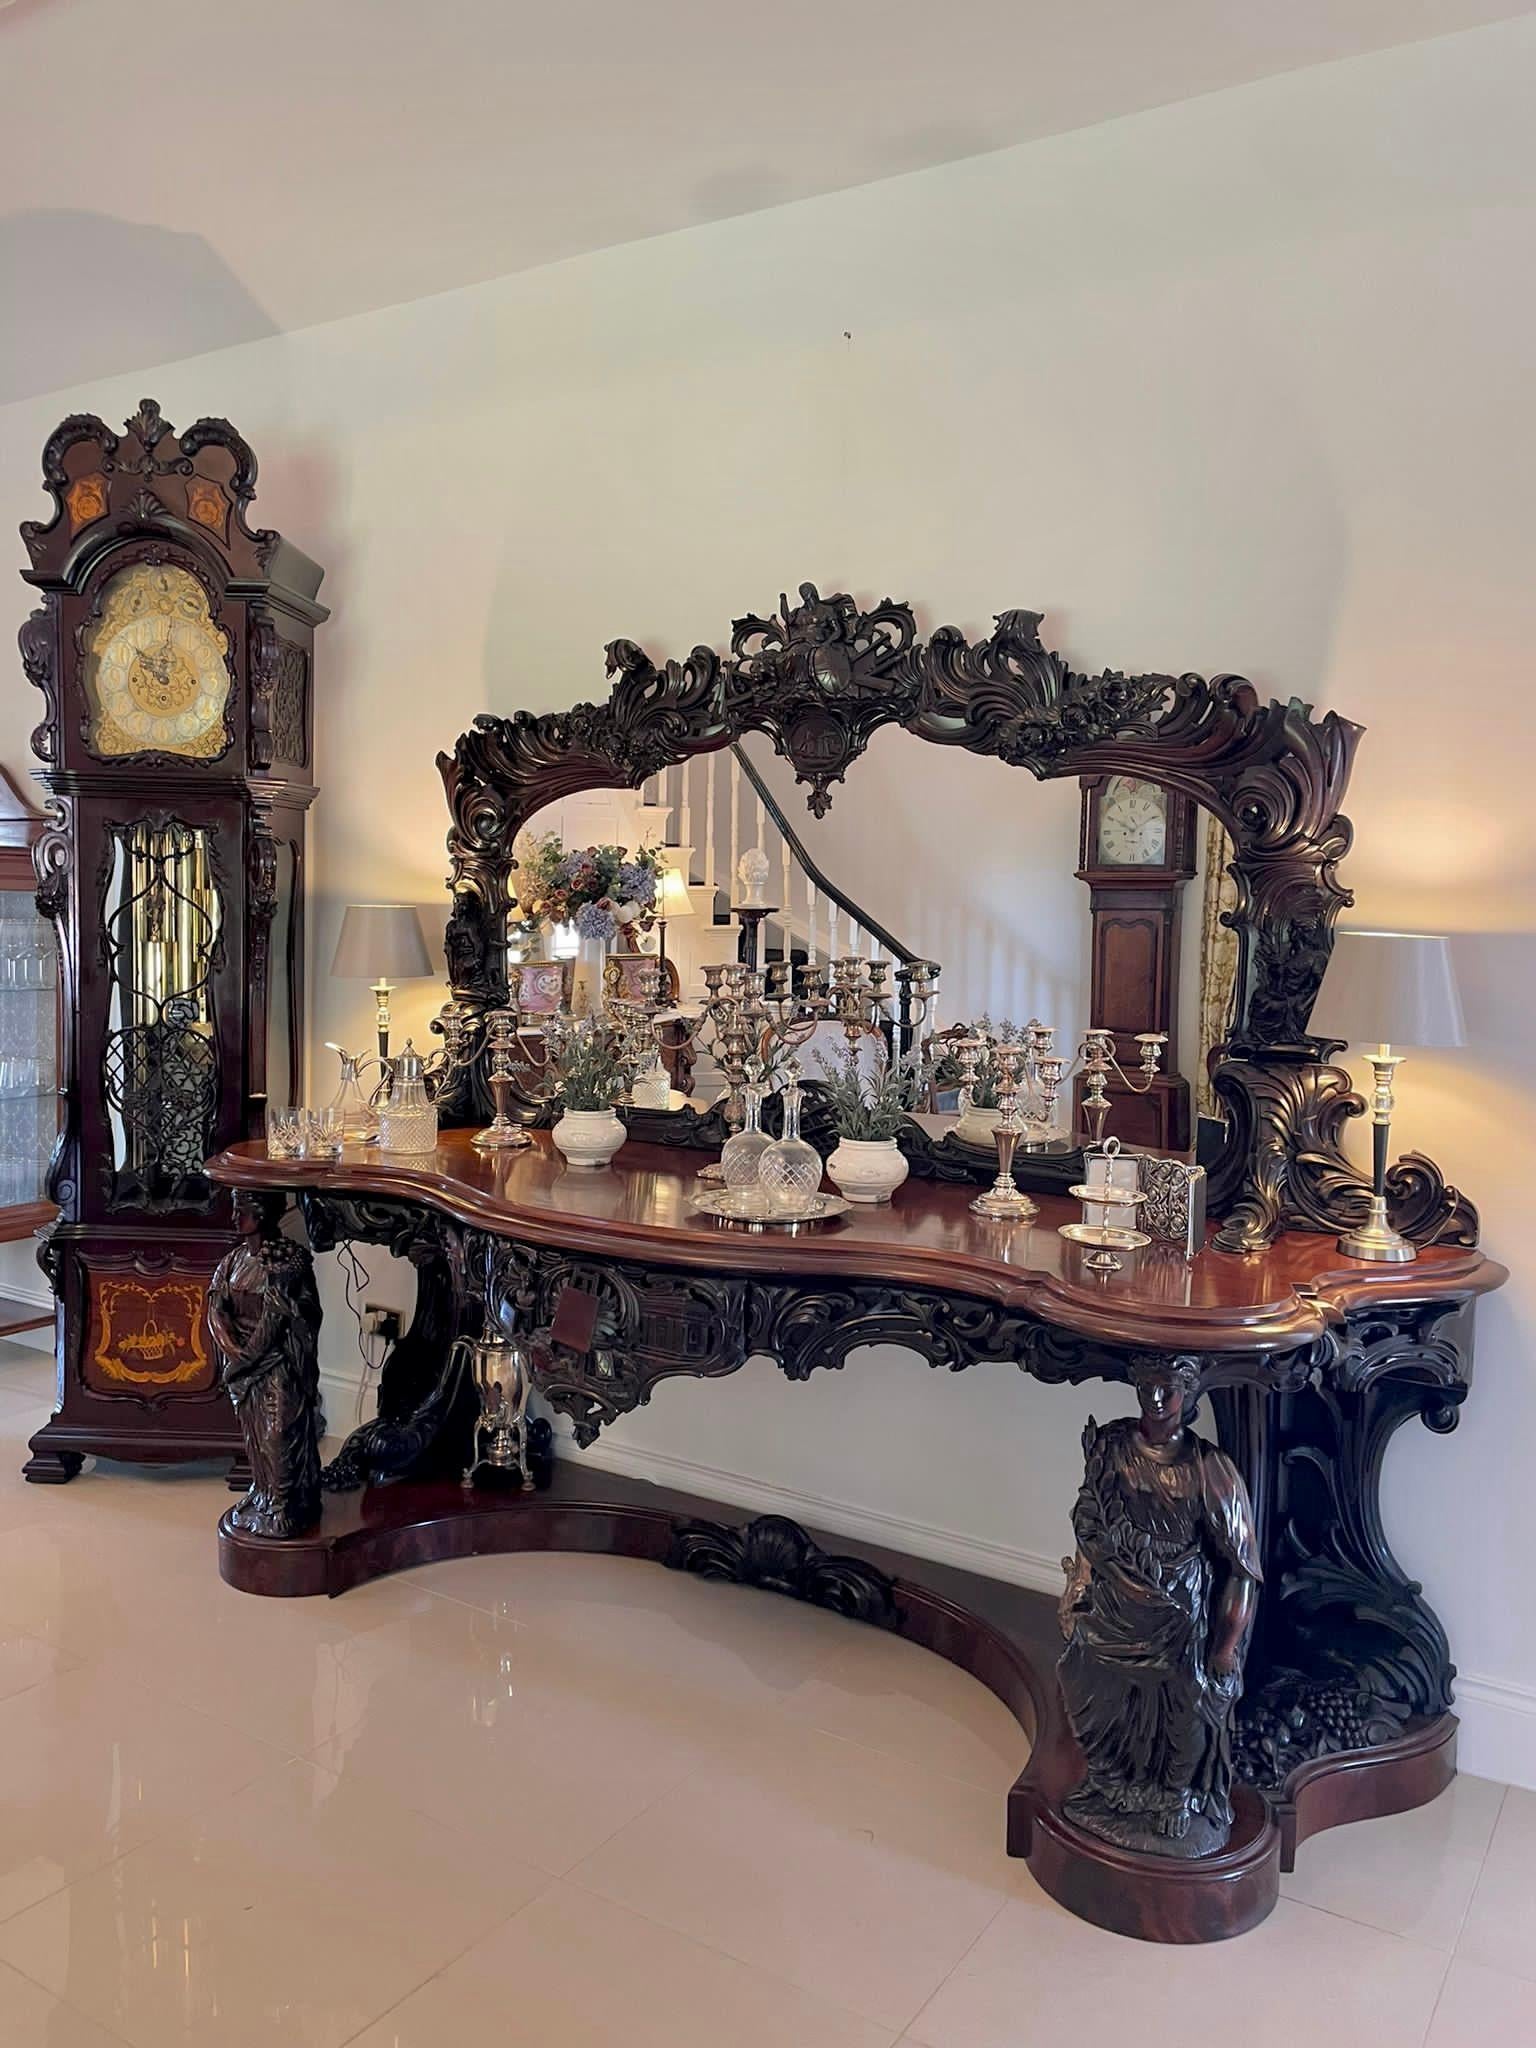 This is an important example of British furniture and history having a large mirror plate placed within a quality acanthus carved and scrolled frame. It is surmounted by a decorative plume depicting Britannia with her lion, an oval shipping scene,